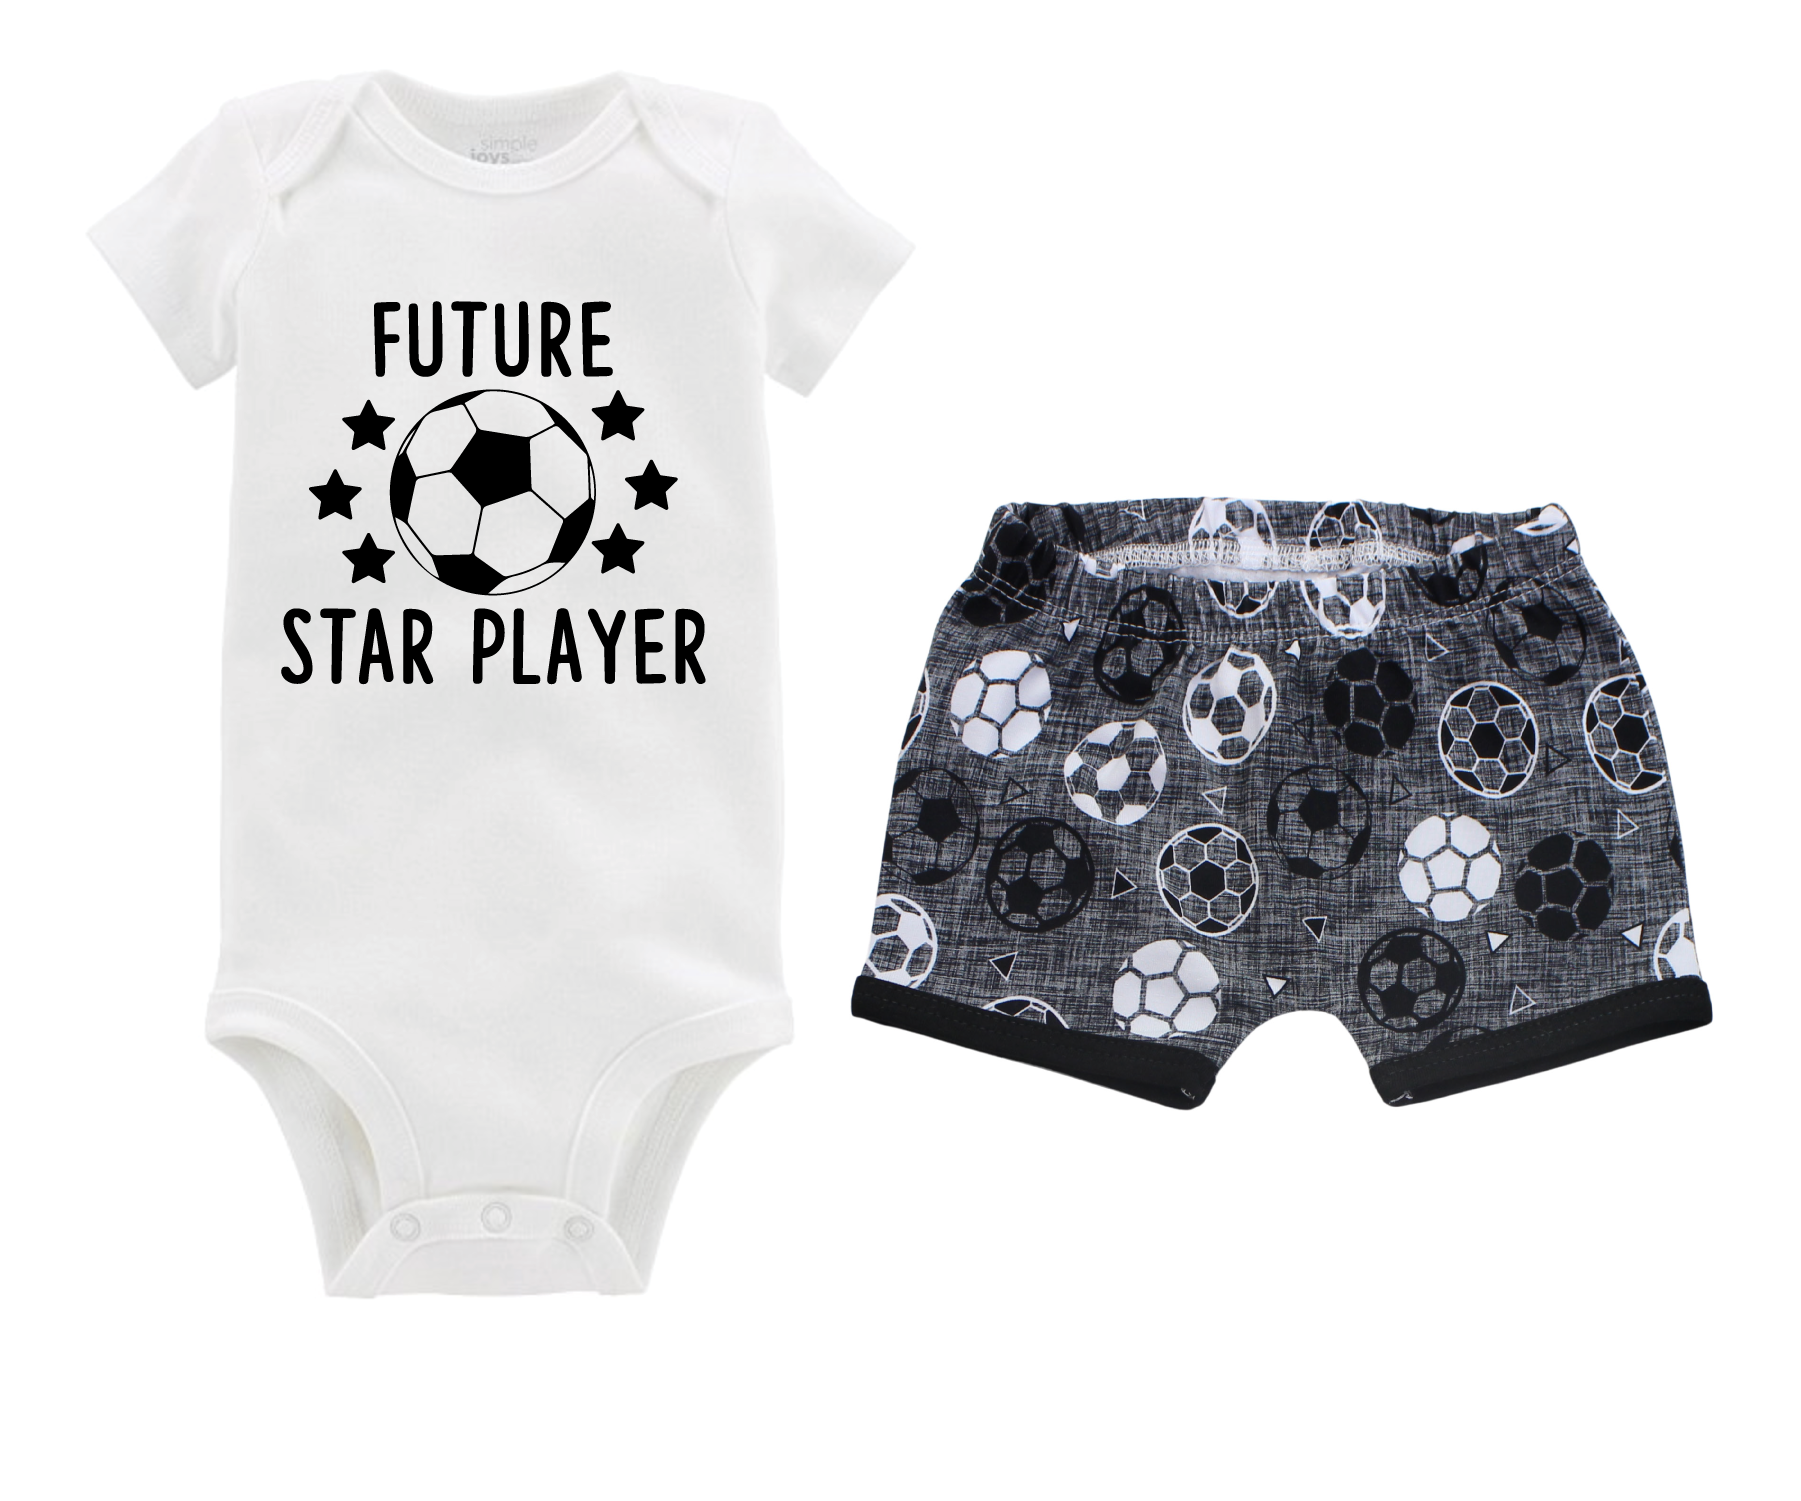 Unisex Gray Soccer Short Outfit